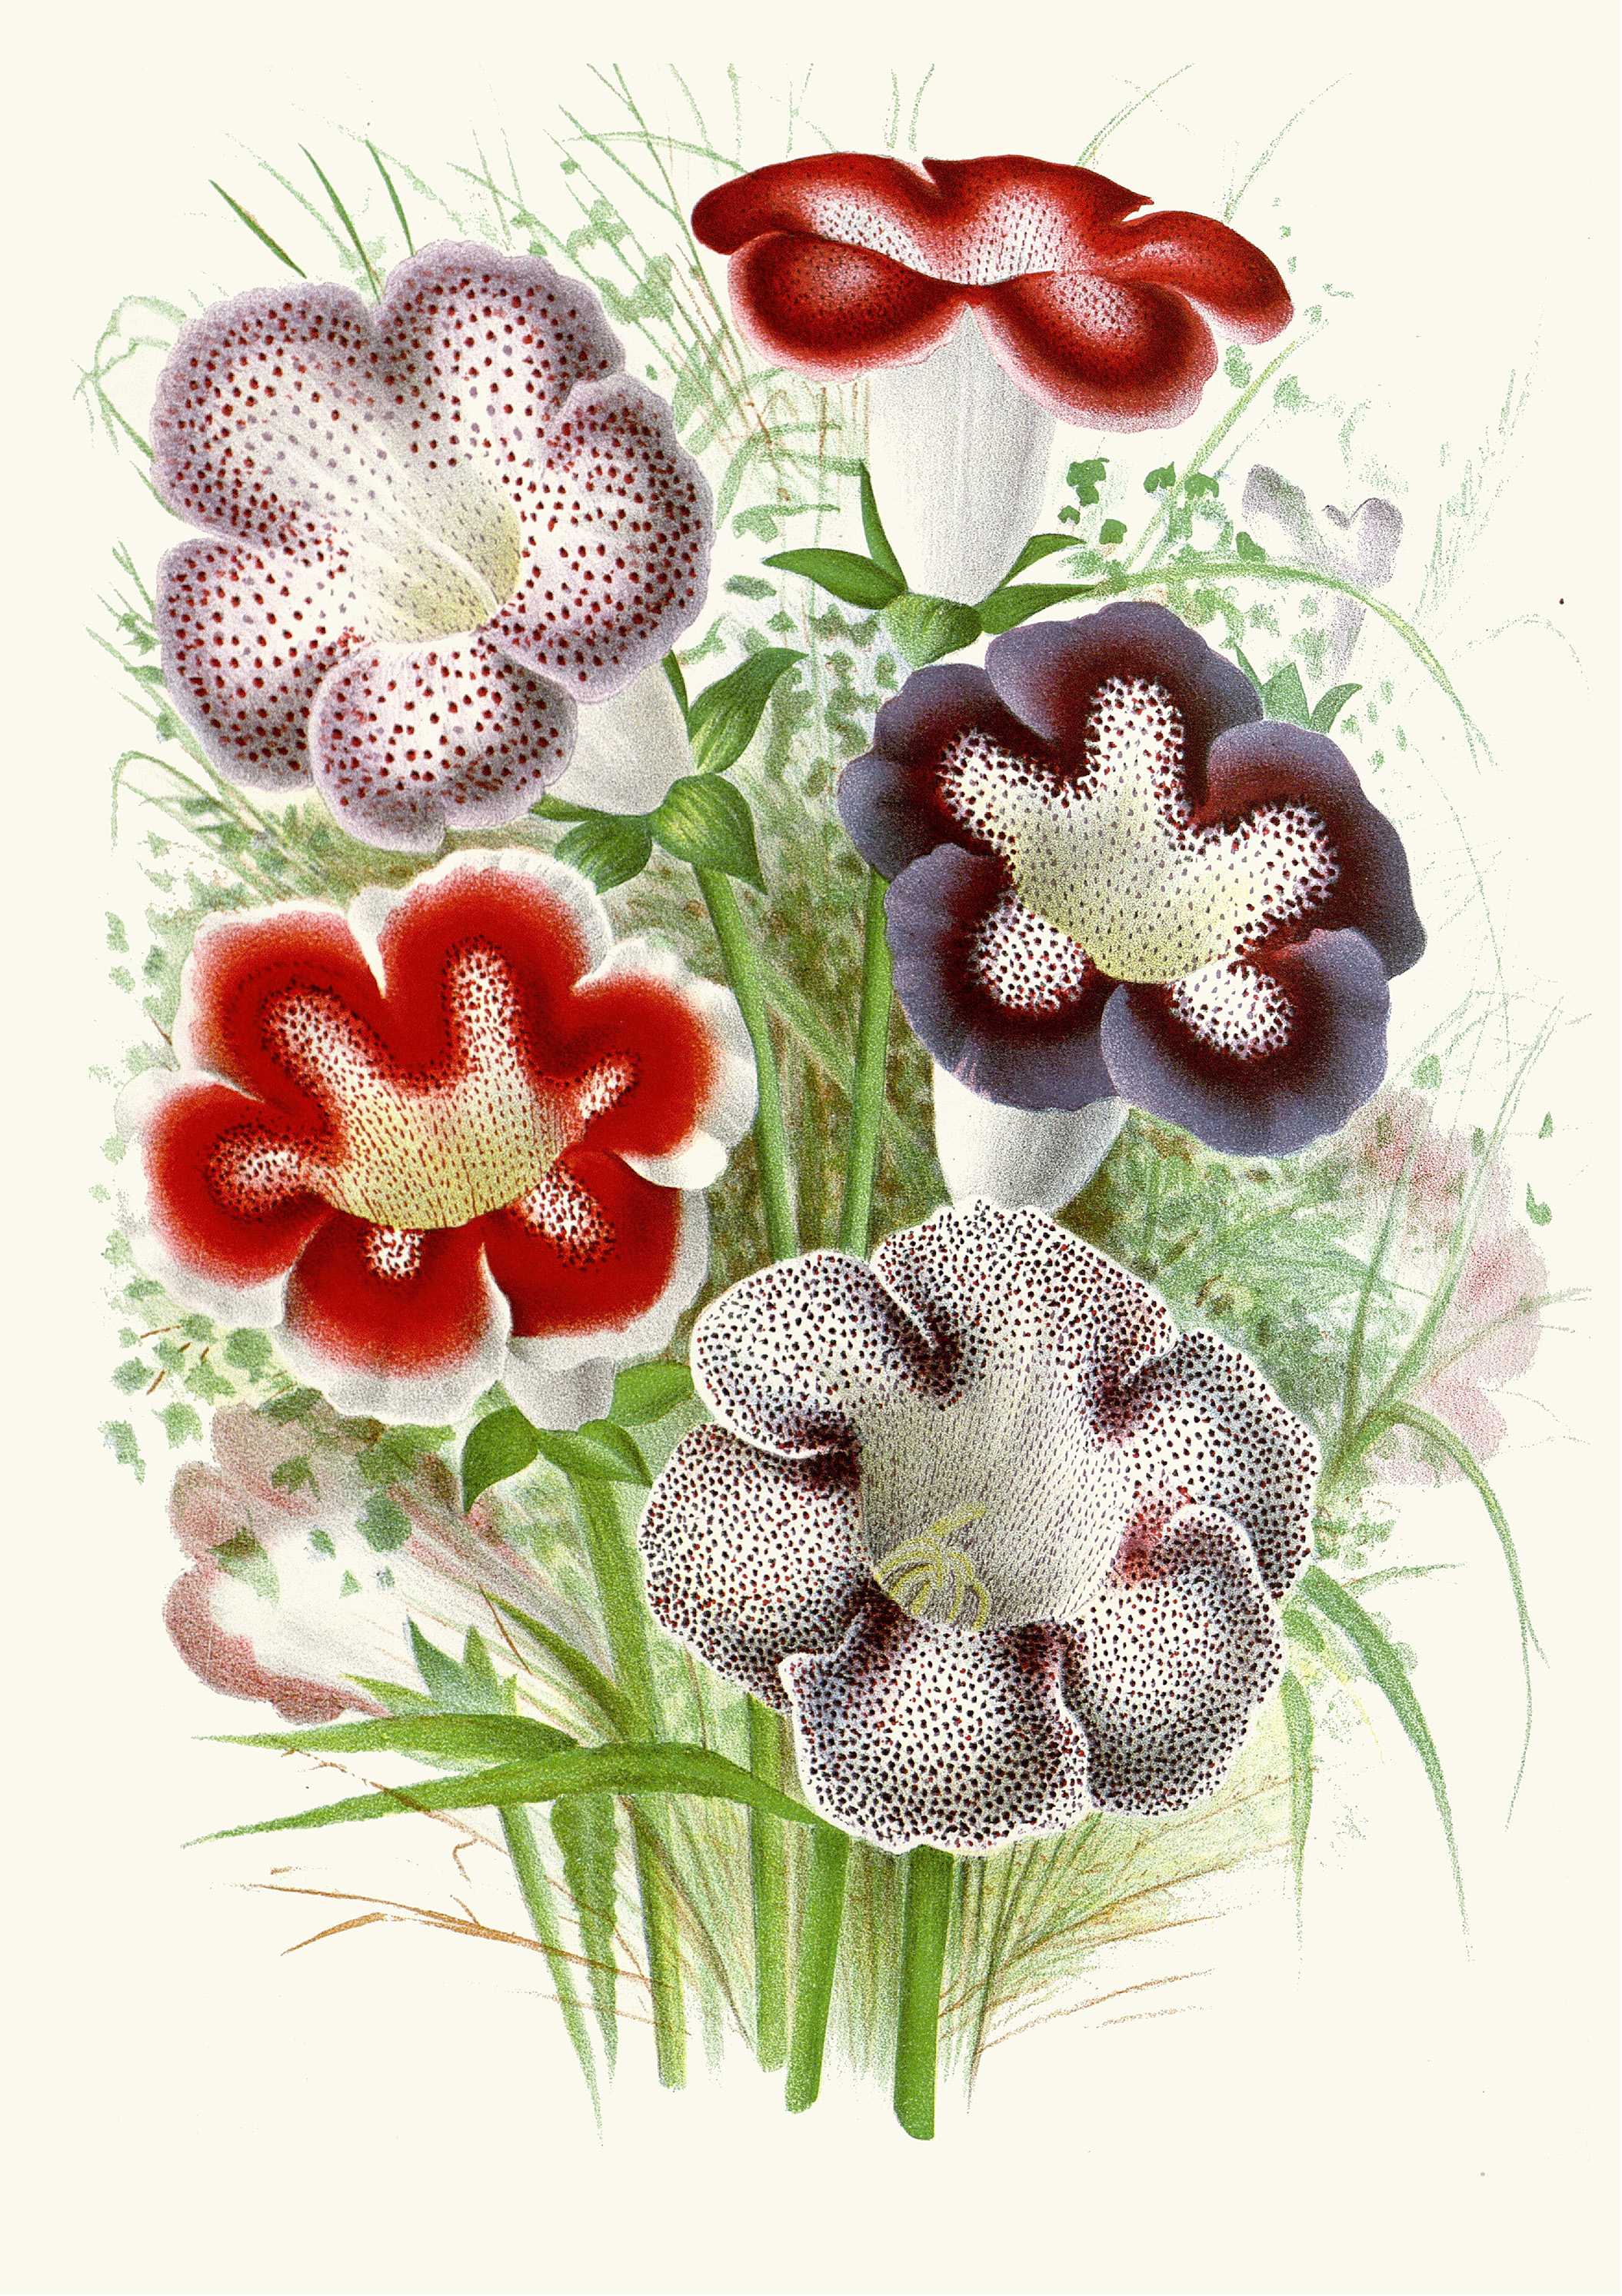 Find out more about Charles Antoine Lemaire - Varietes De Gloxinia